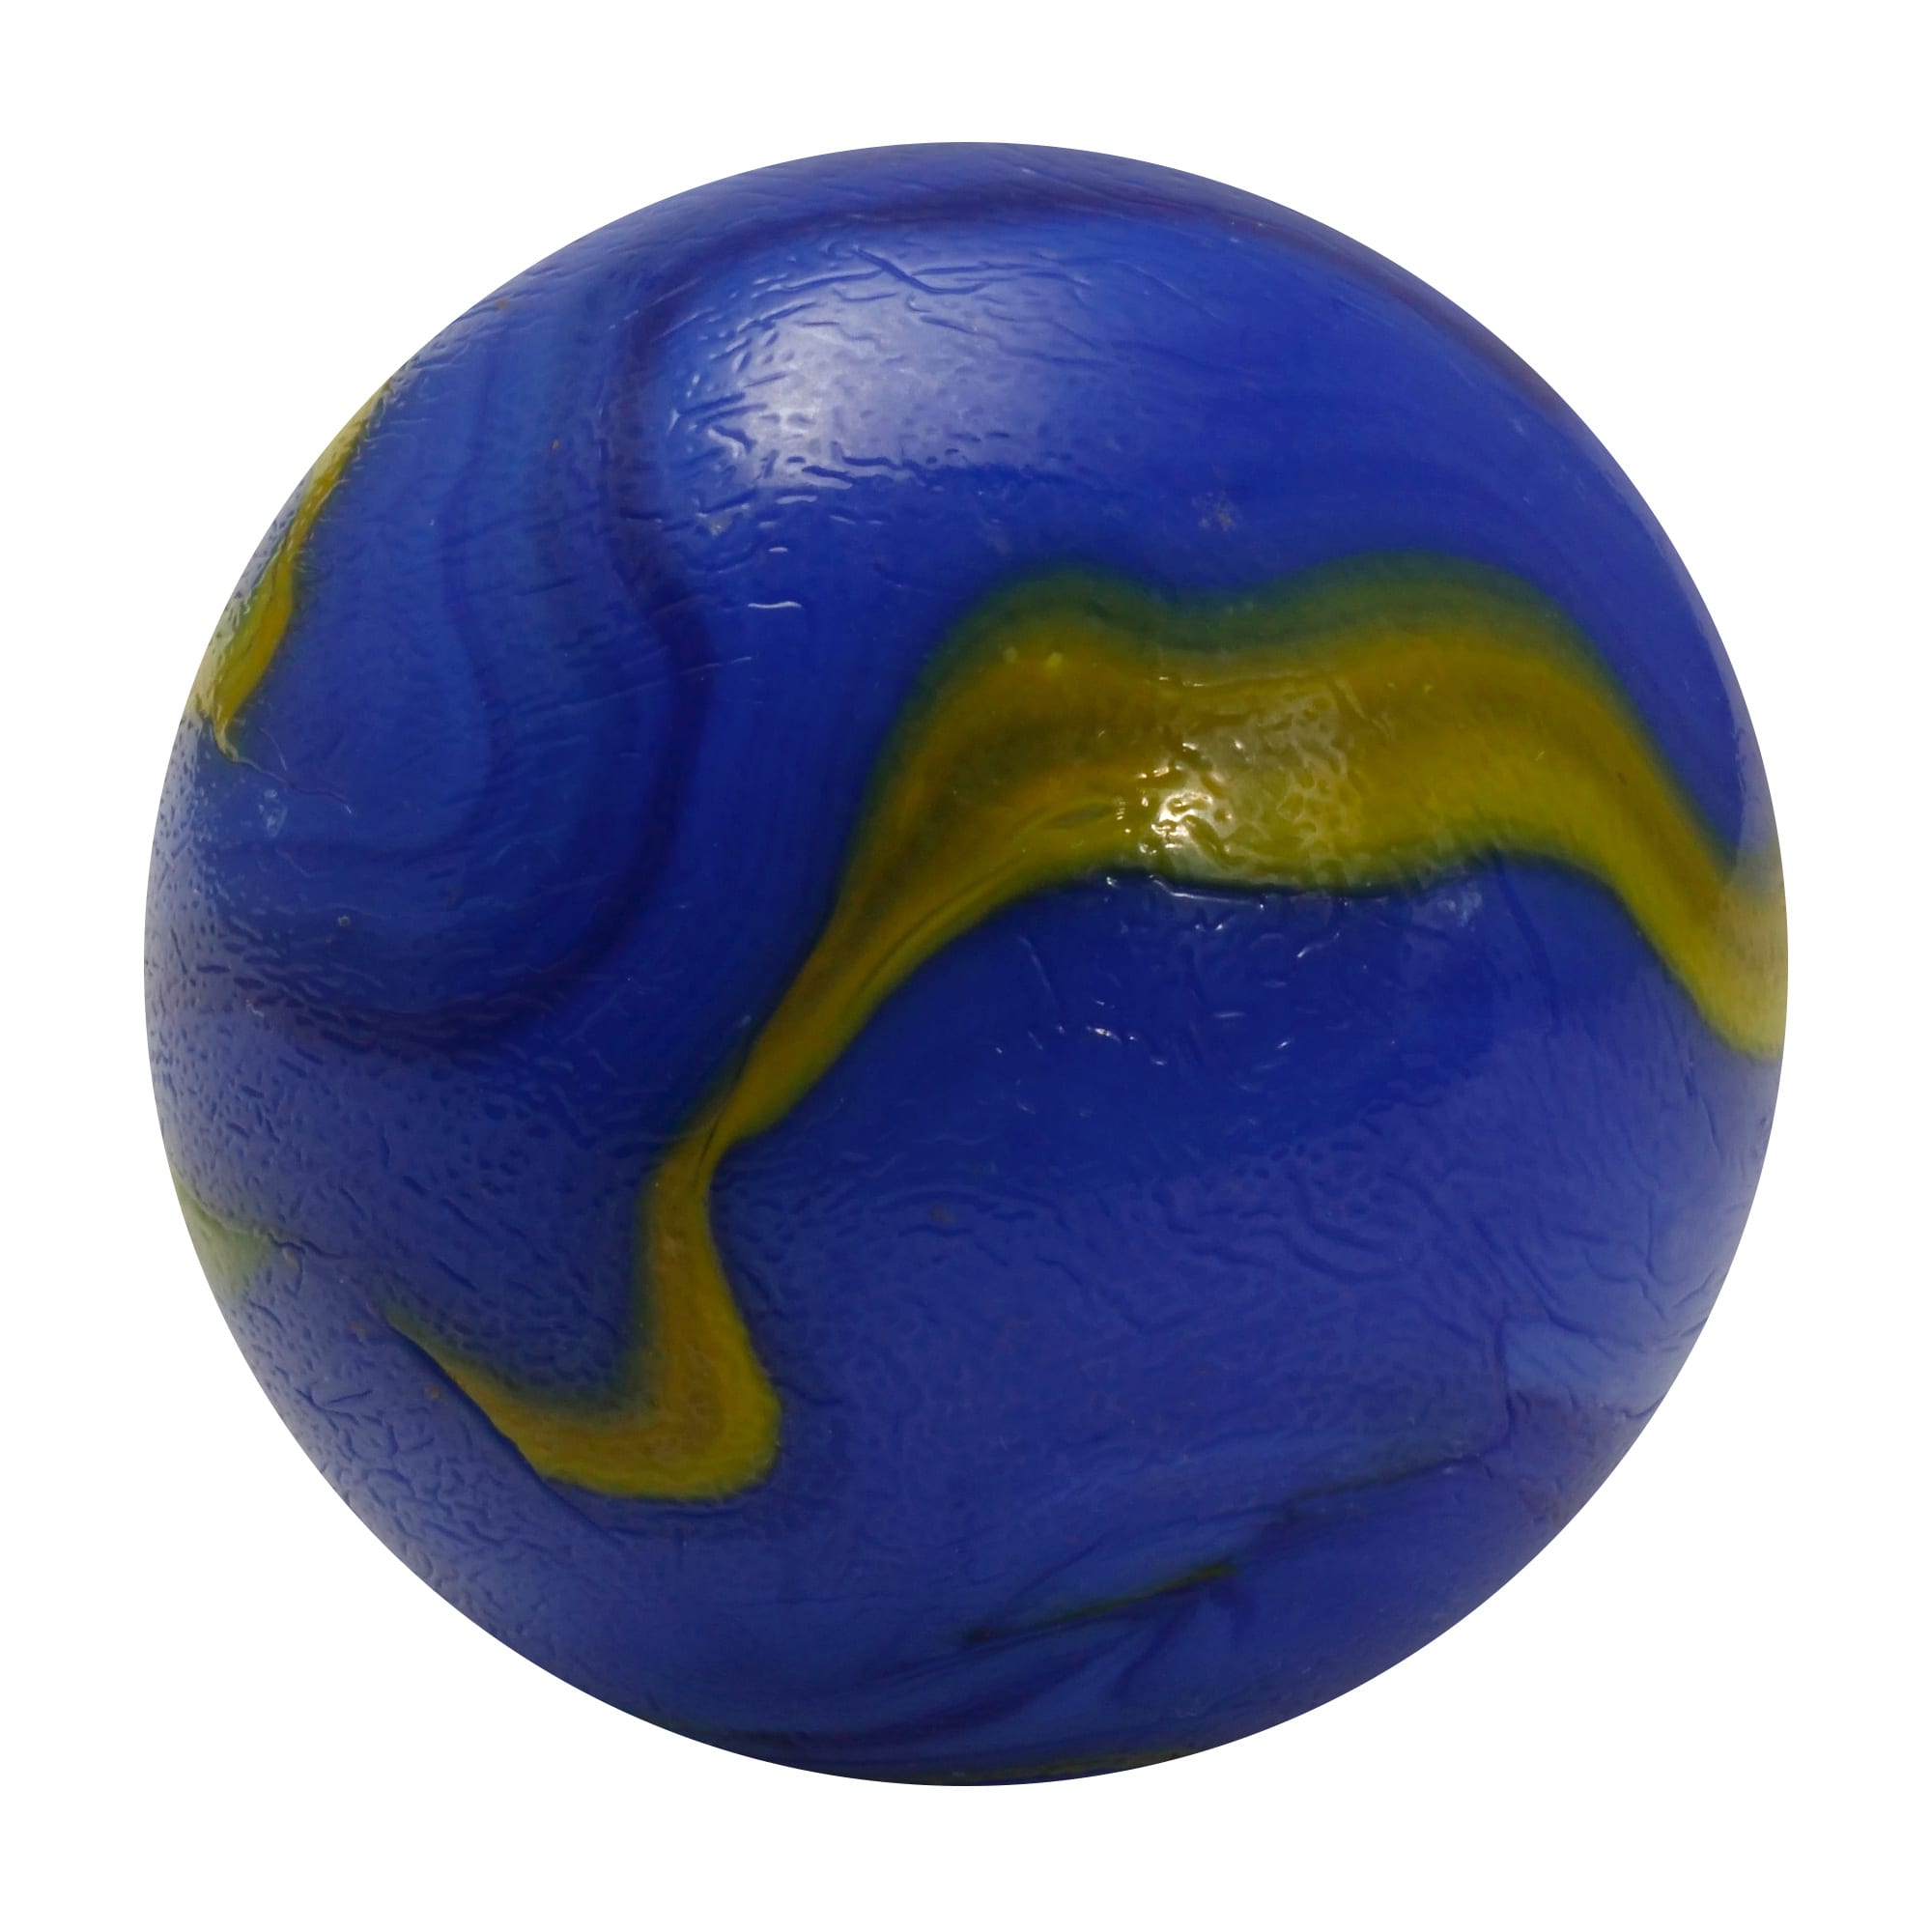 Details about   22mm Van Gogh Marble Shooters Pack 5 w/Stands Opaque Royal Blue w Yellow Swirls 